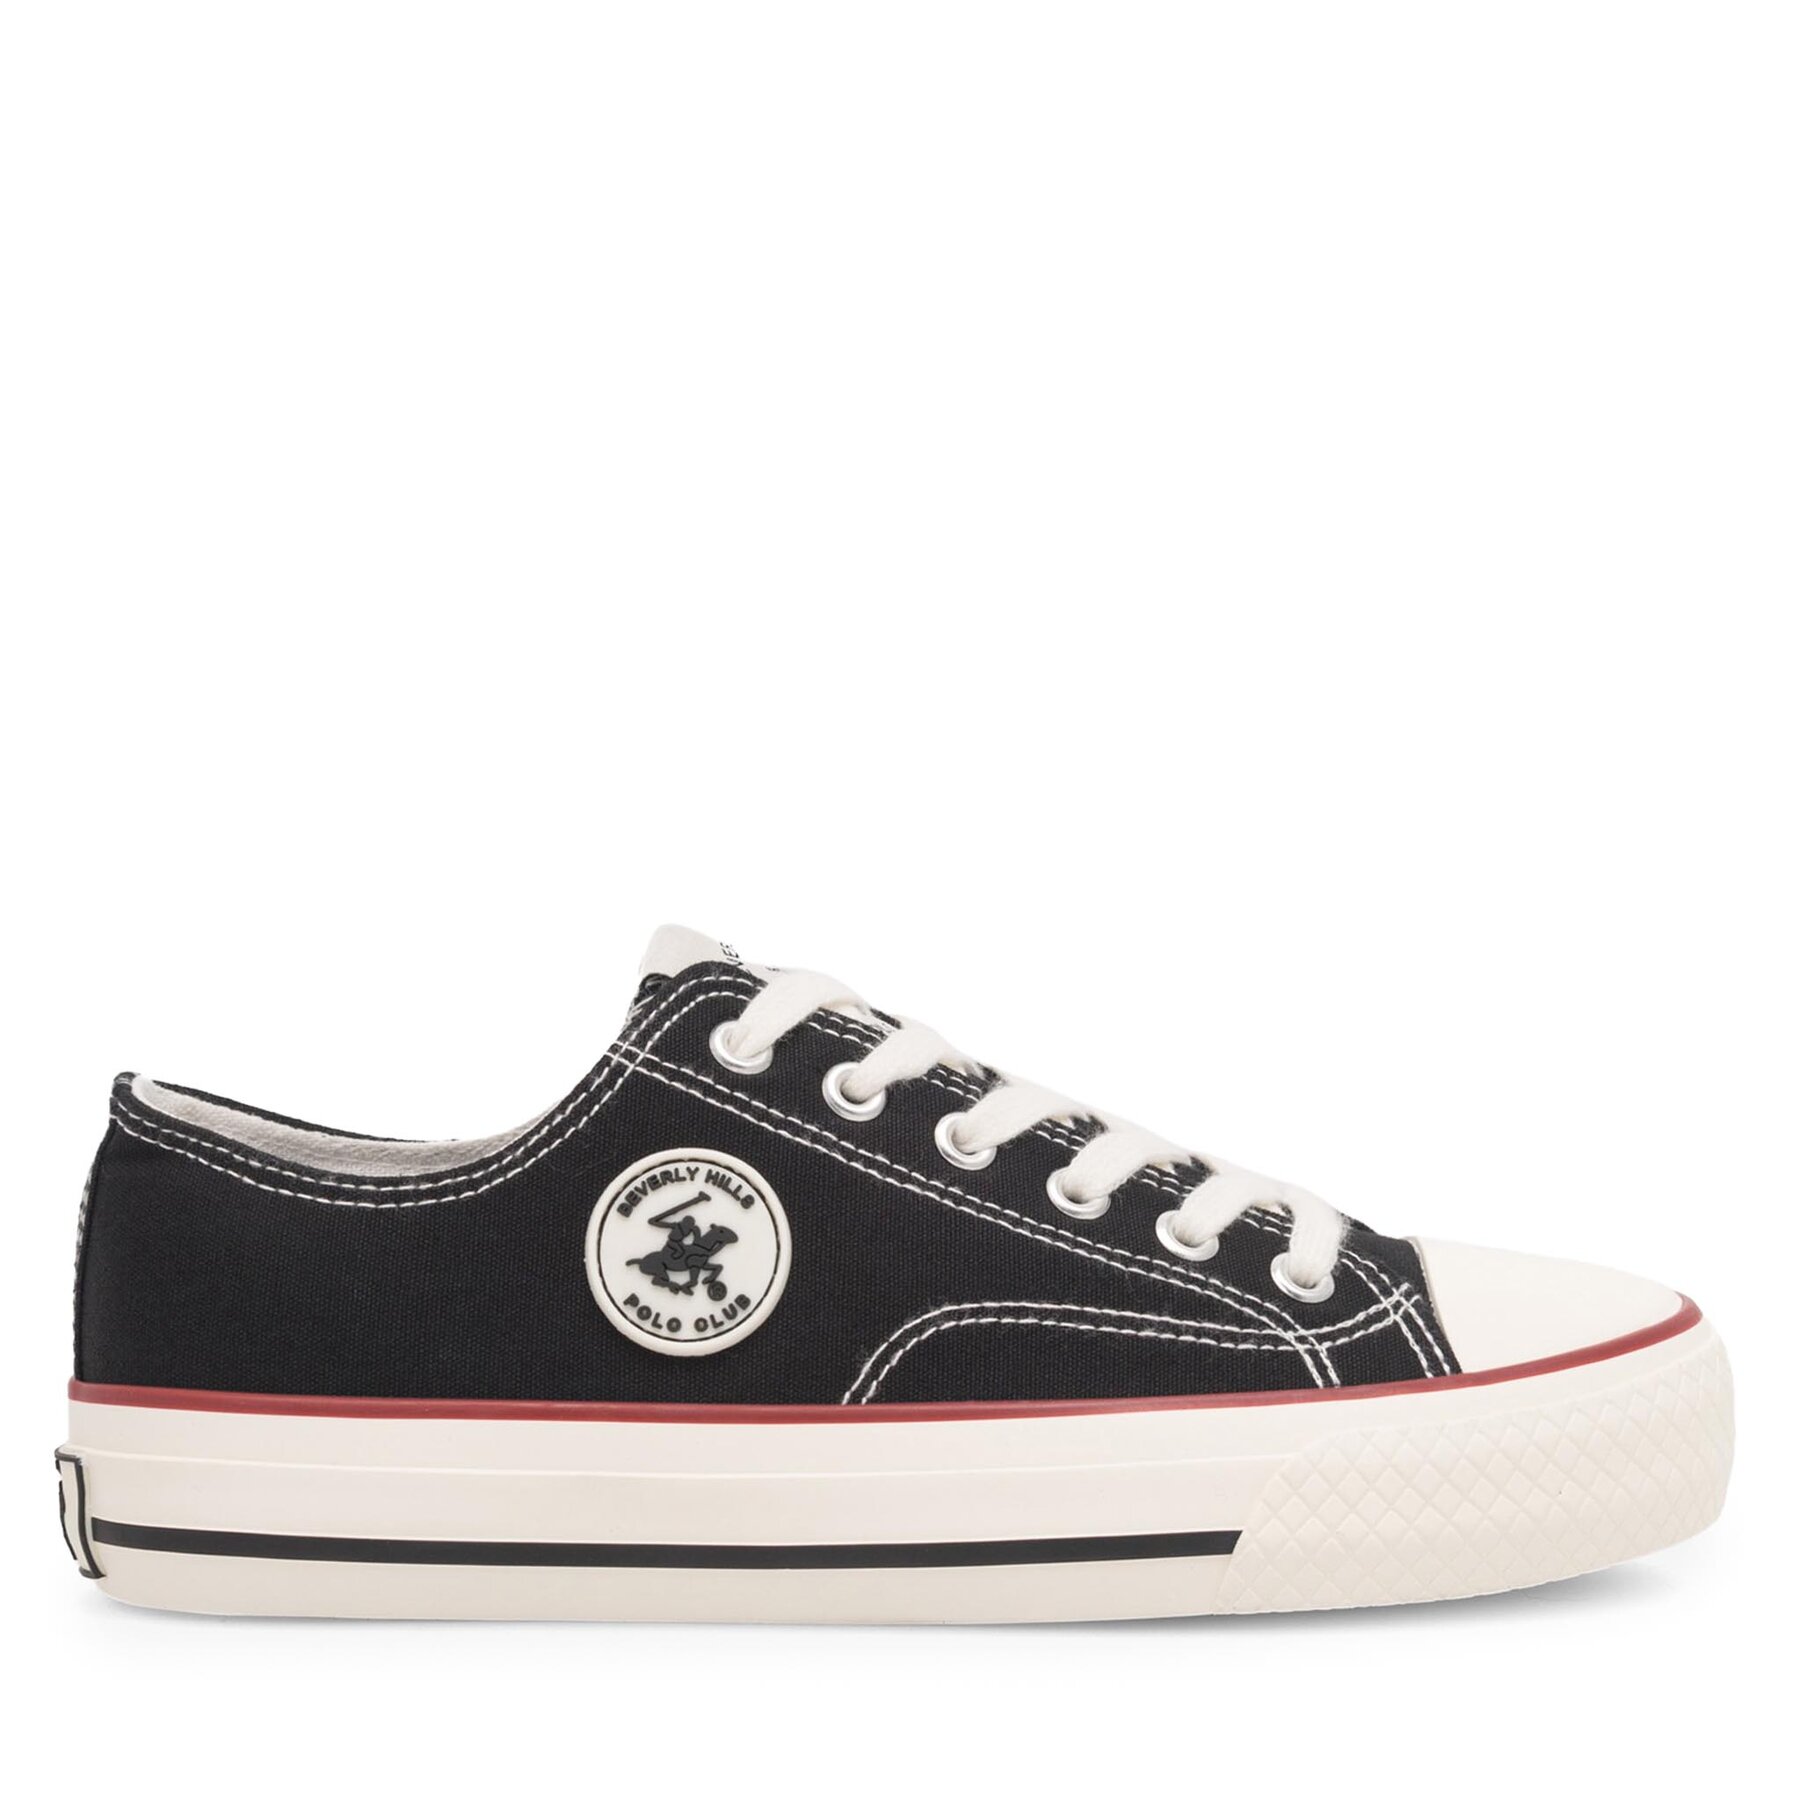 Sneakers aus Stoff Beverly Hills Polo Club WP40-OG-31-1 Schwarz von Beverly Hills Polo Club